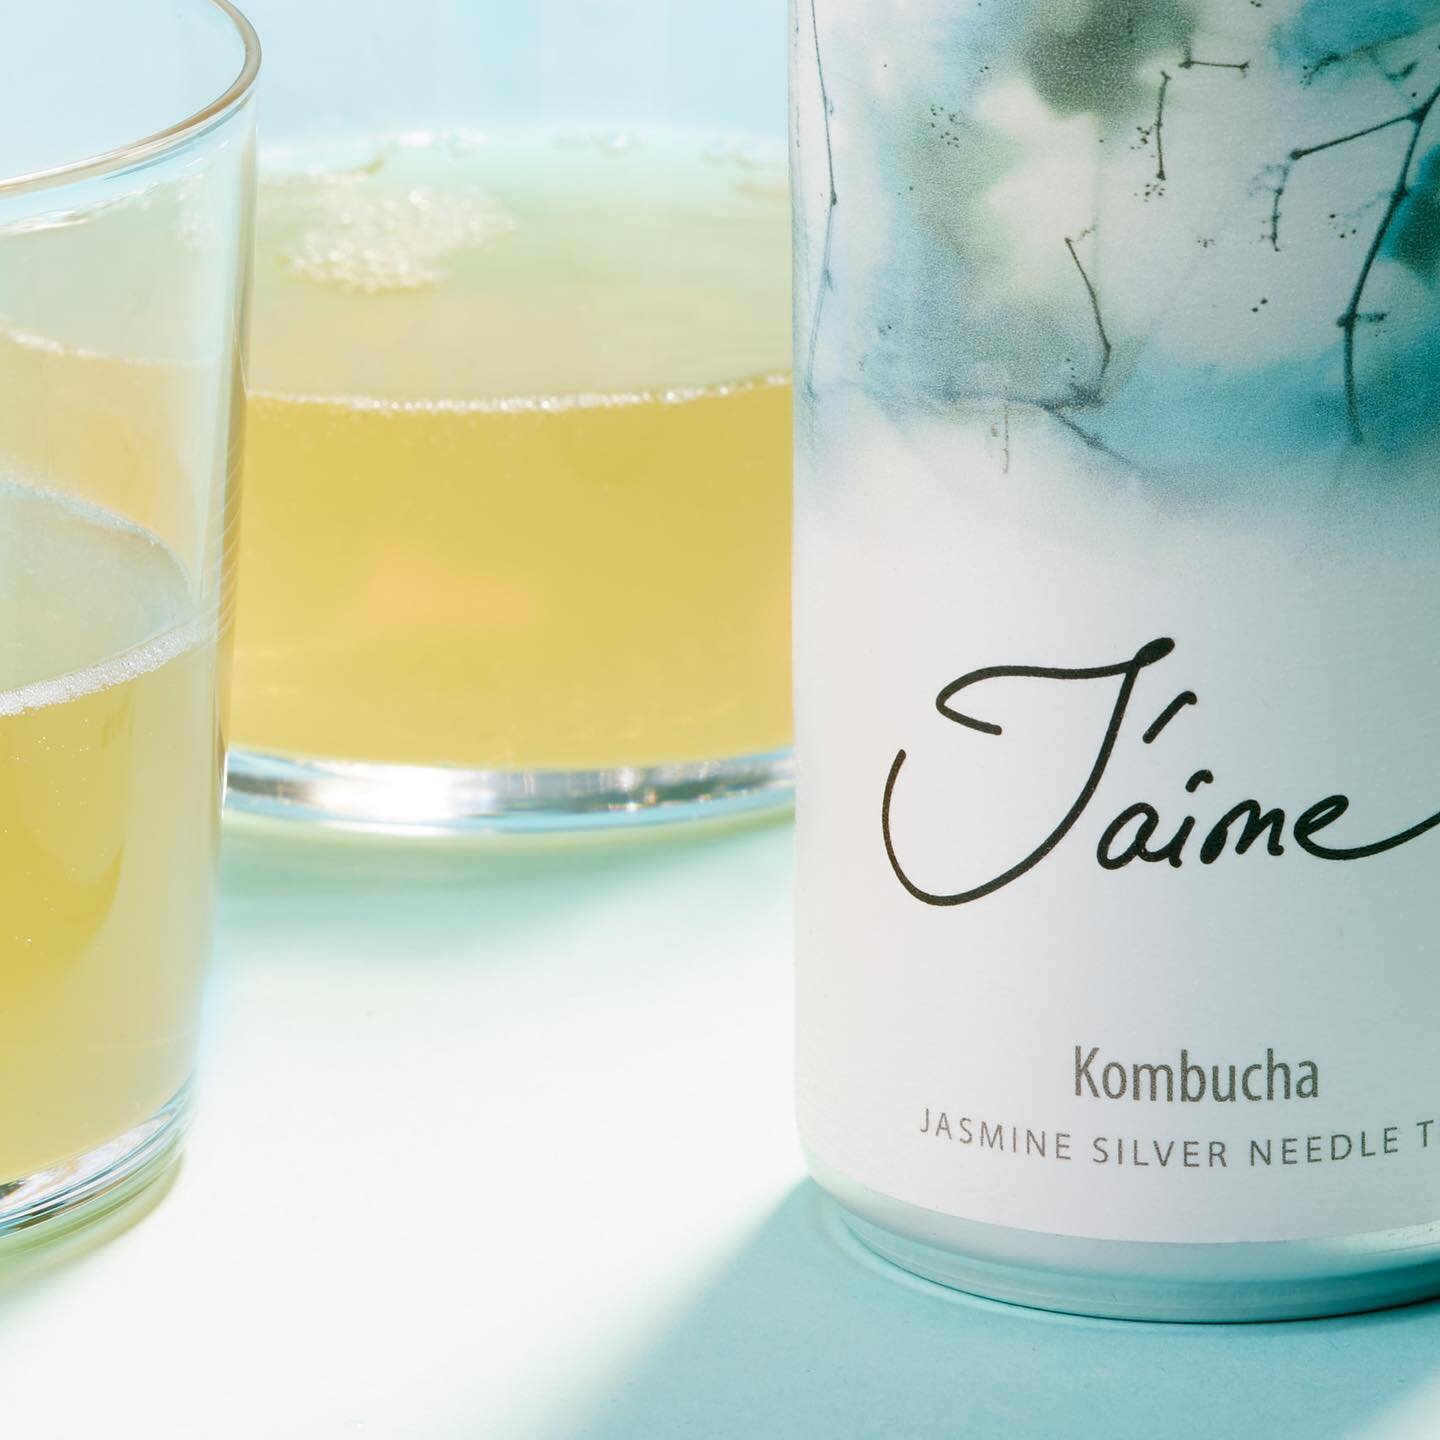 J&rsquo;aime is made using a unique combination of four of the world&rsquo;s most exceptional white and green teas (Snow Bud, Jasmine Huang Shan Ya, Sencha and Jasmine Ying Zhen Silver Needle), J&rsquo;aime Original Kombucha is made in small batch pr